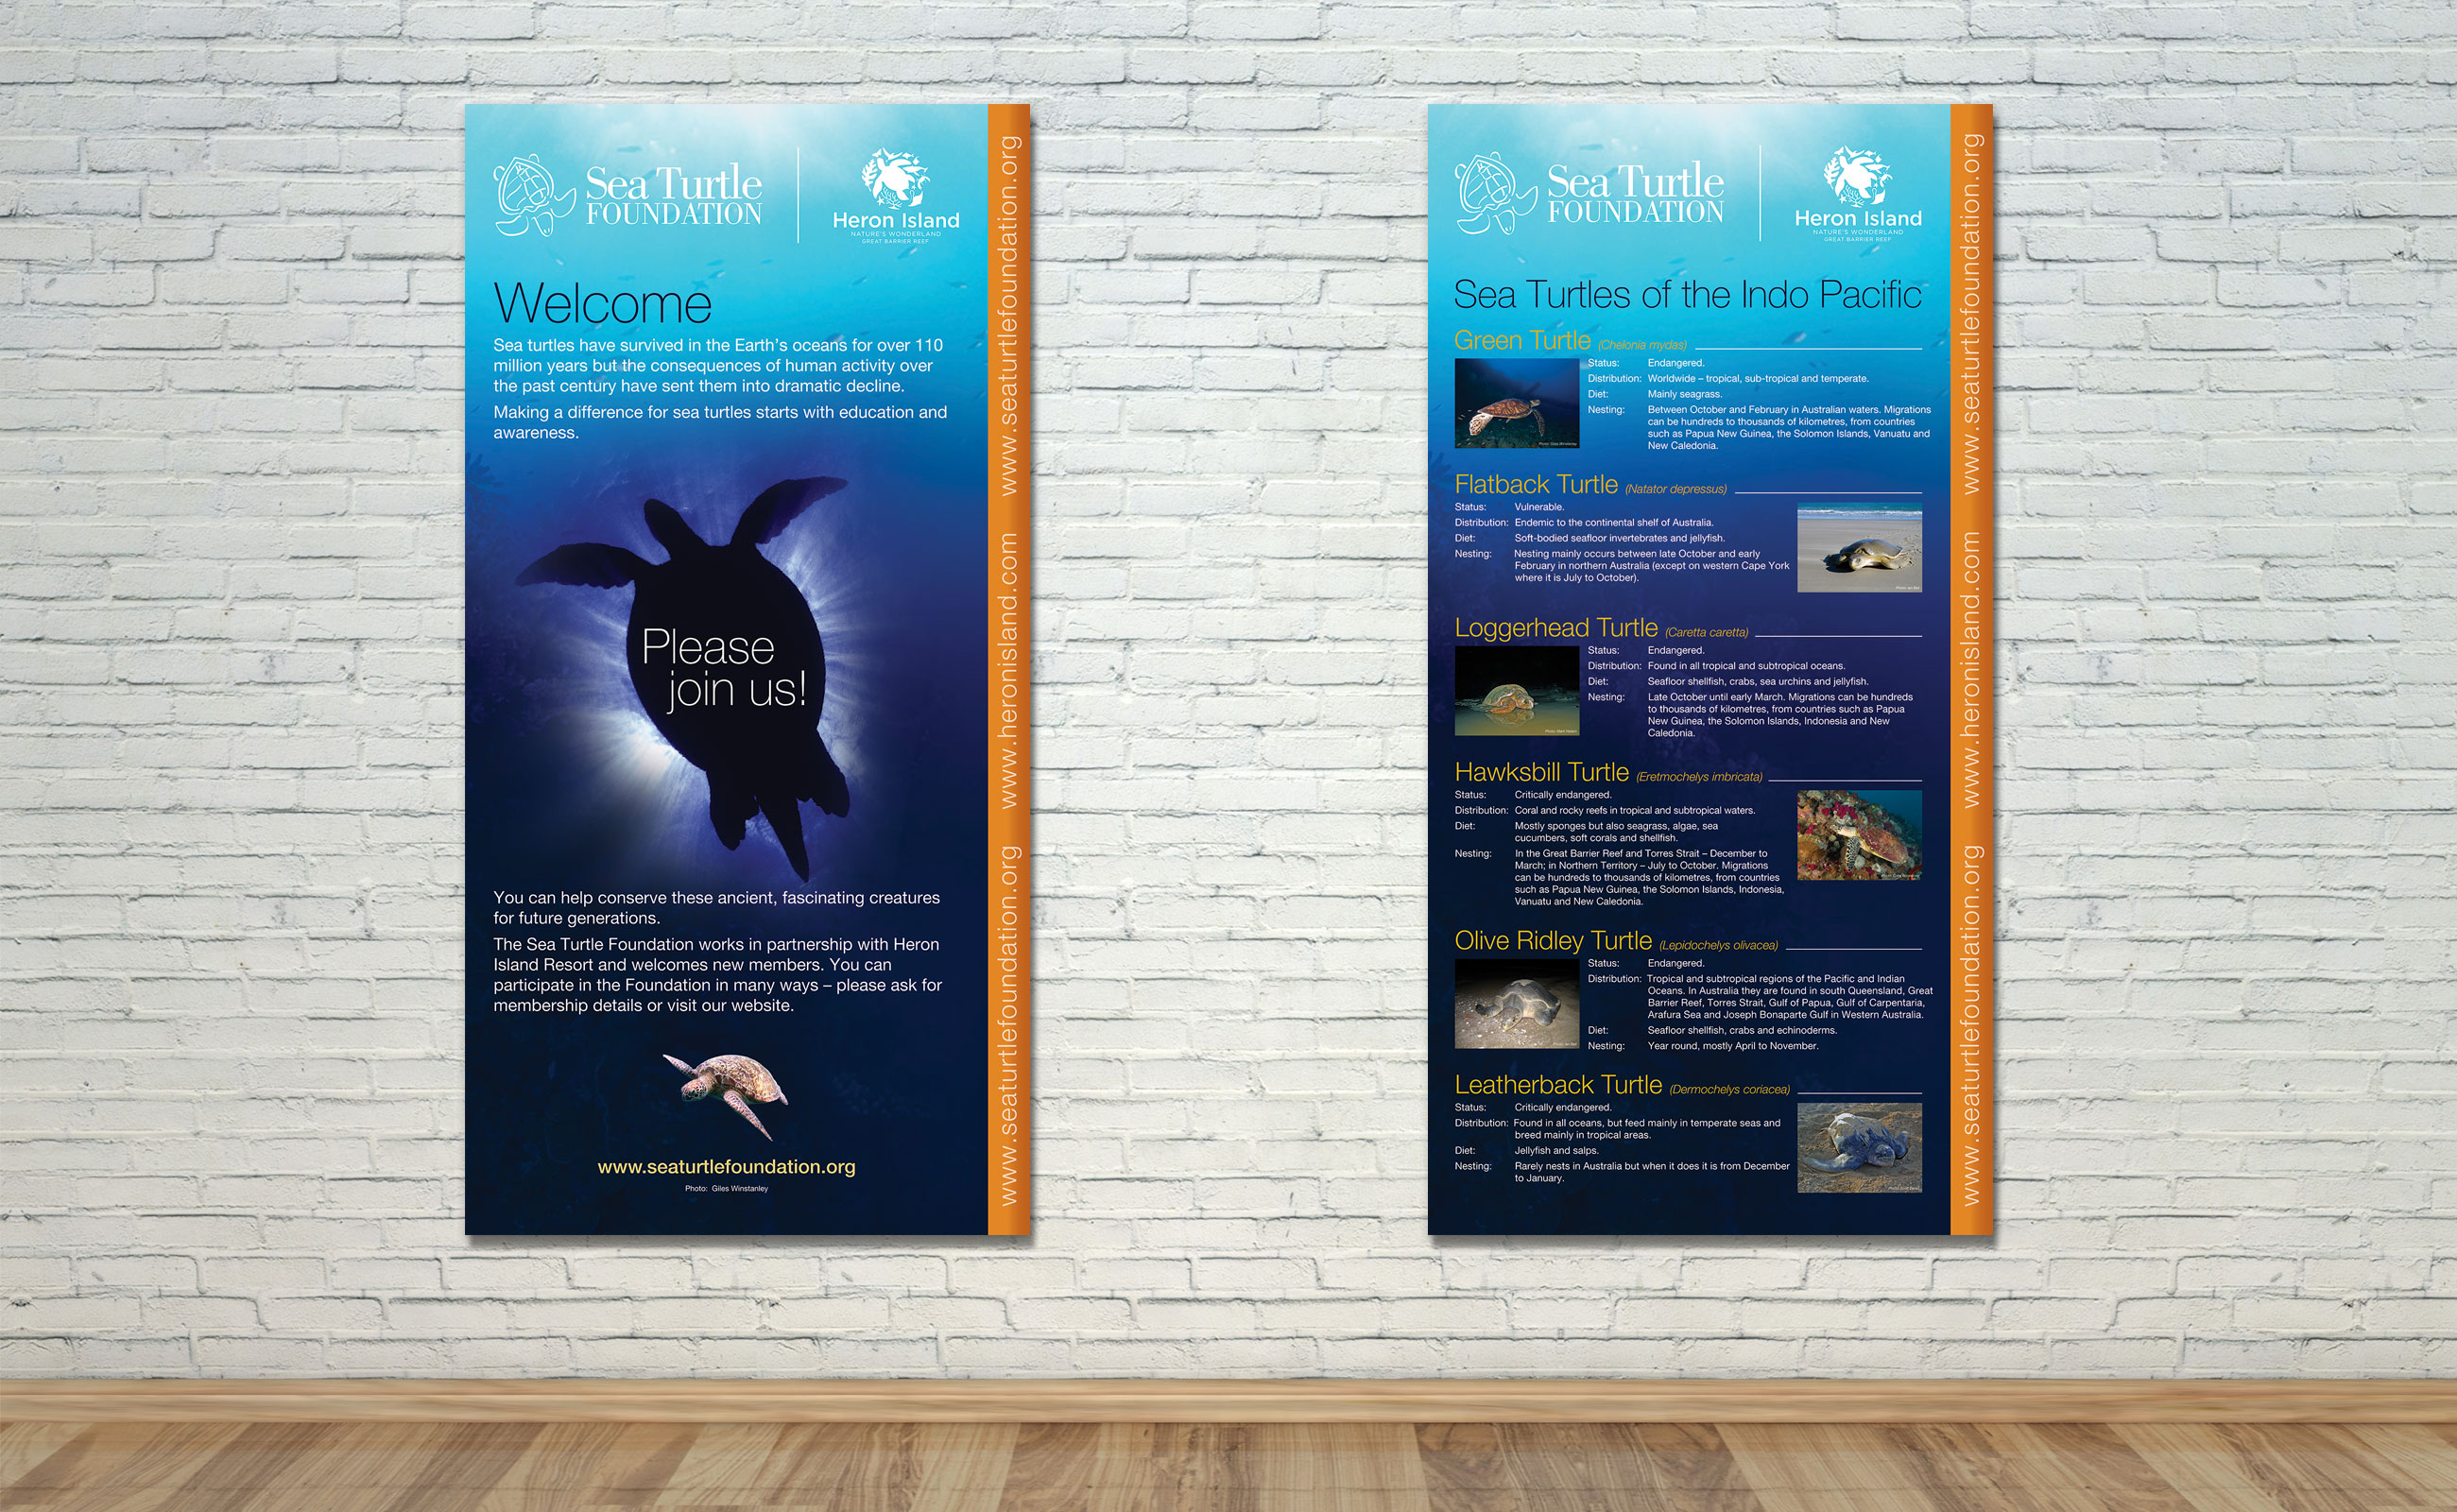 Sea Turtle Foundation large wall posters